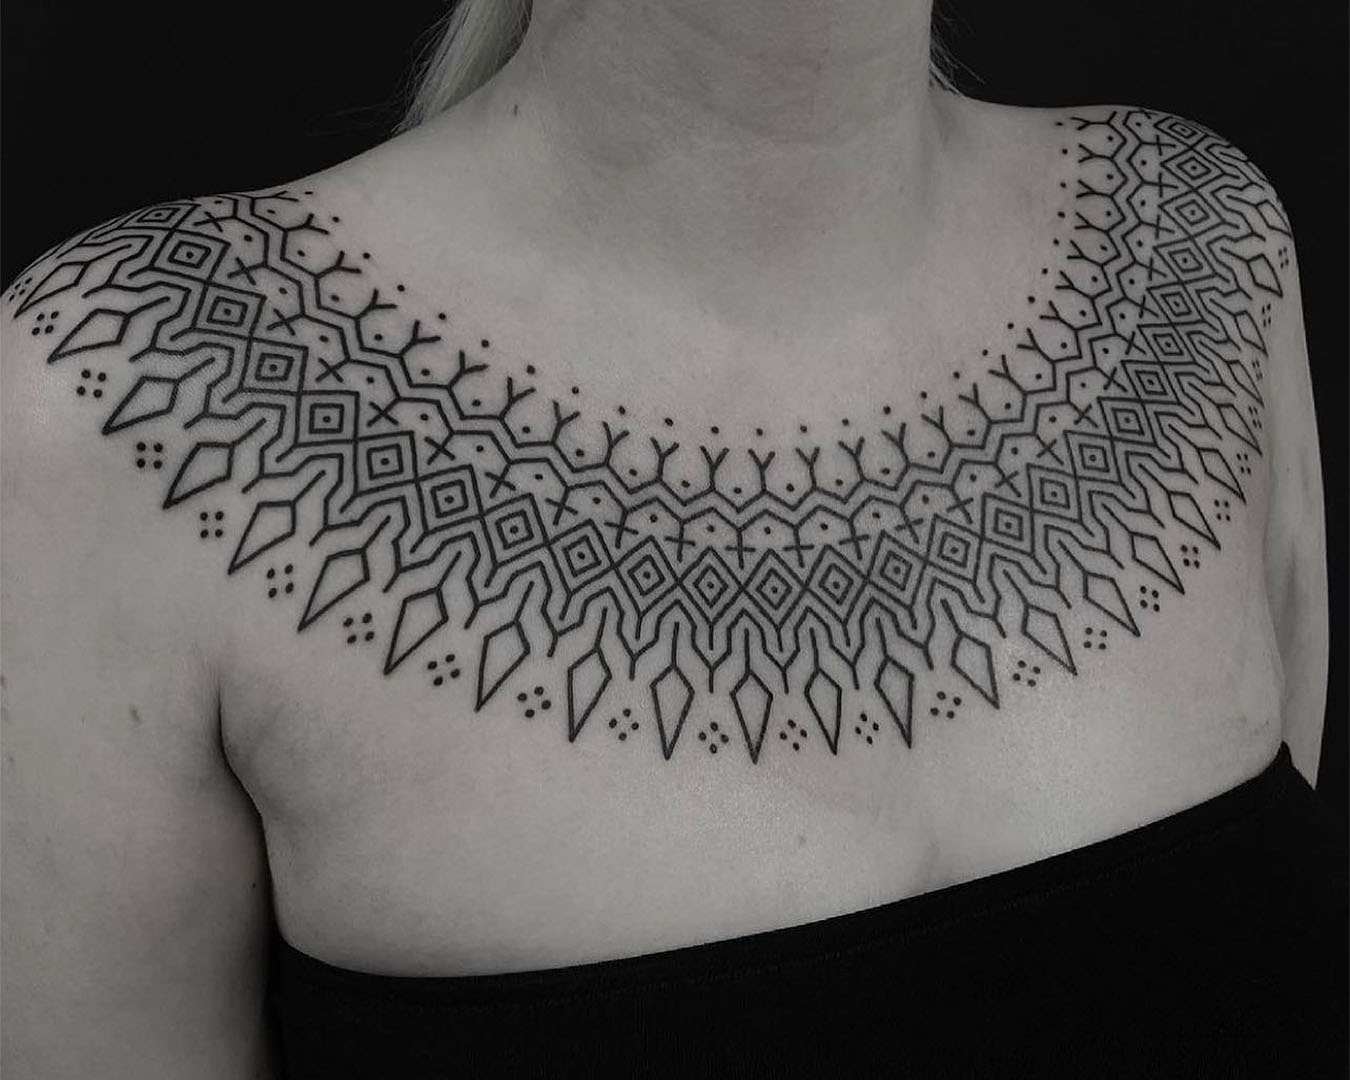 A black and white picture of a beautiful chest tattoo from Sunset Tattoo.